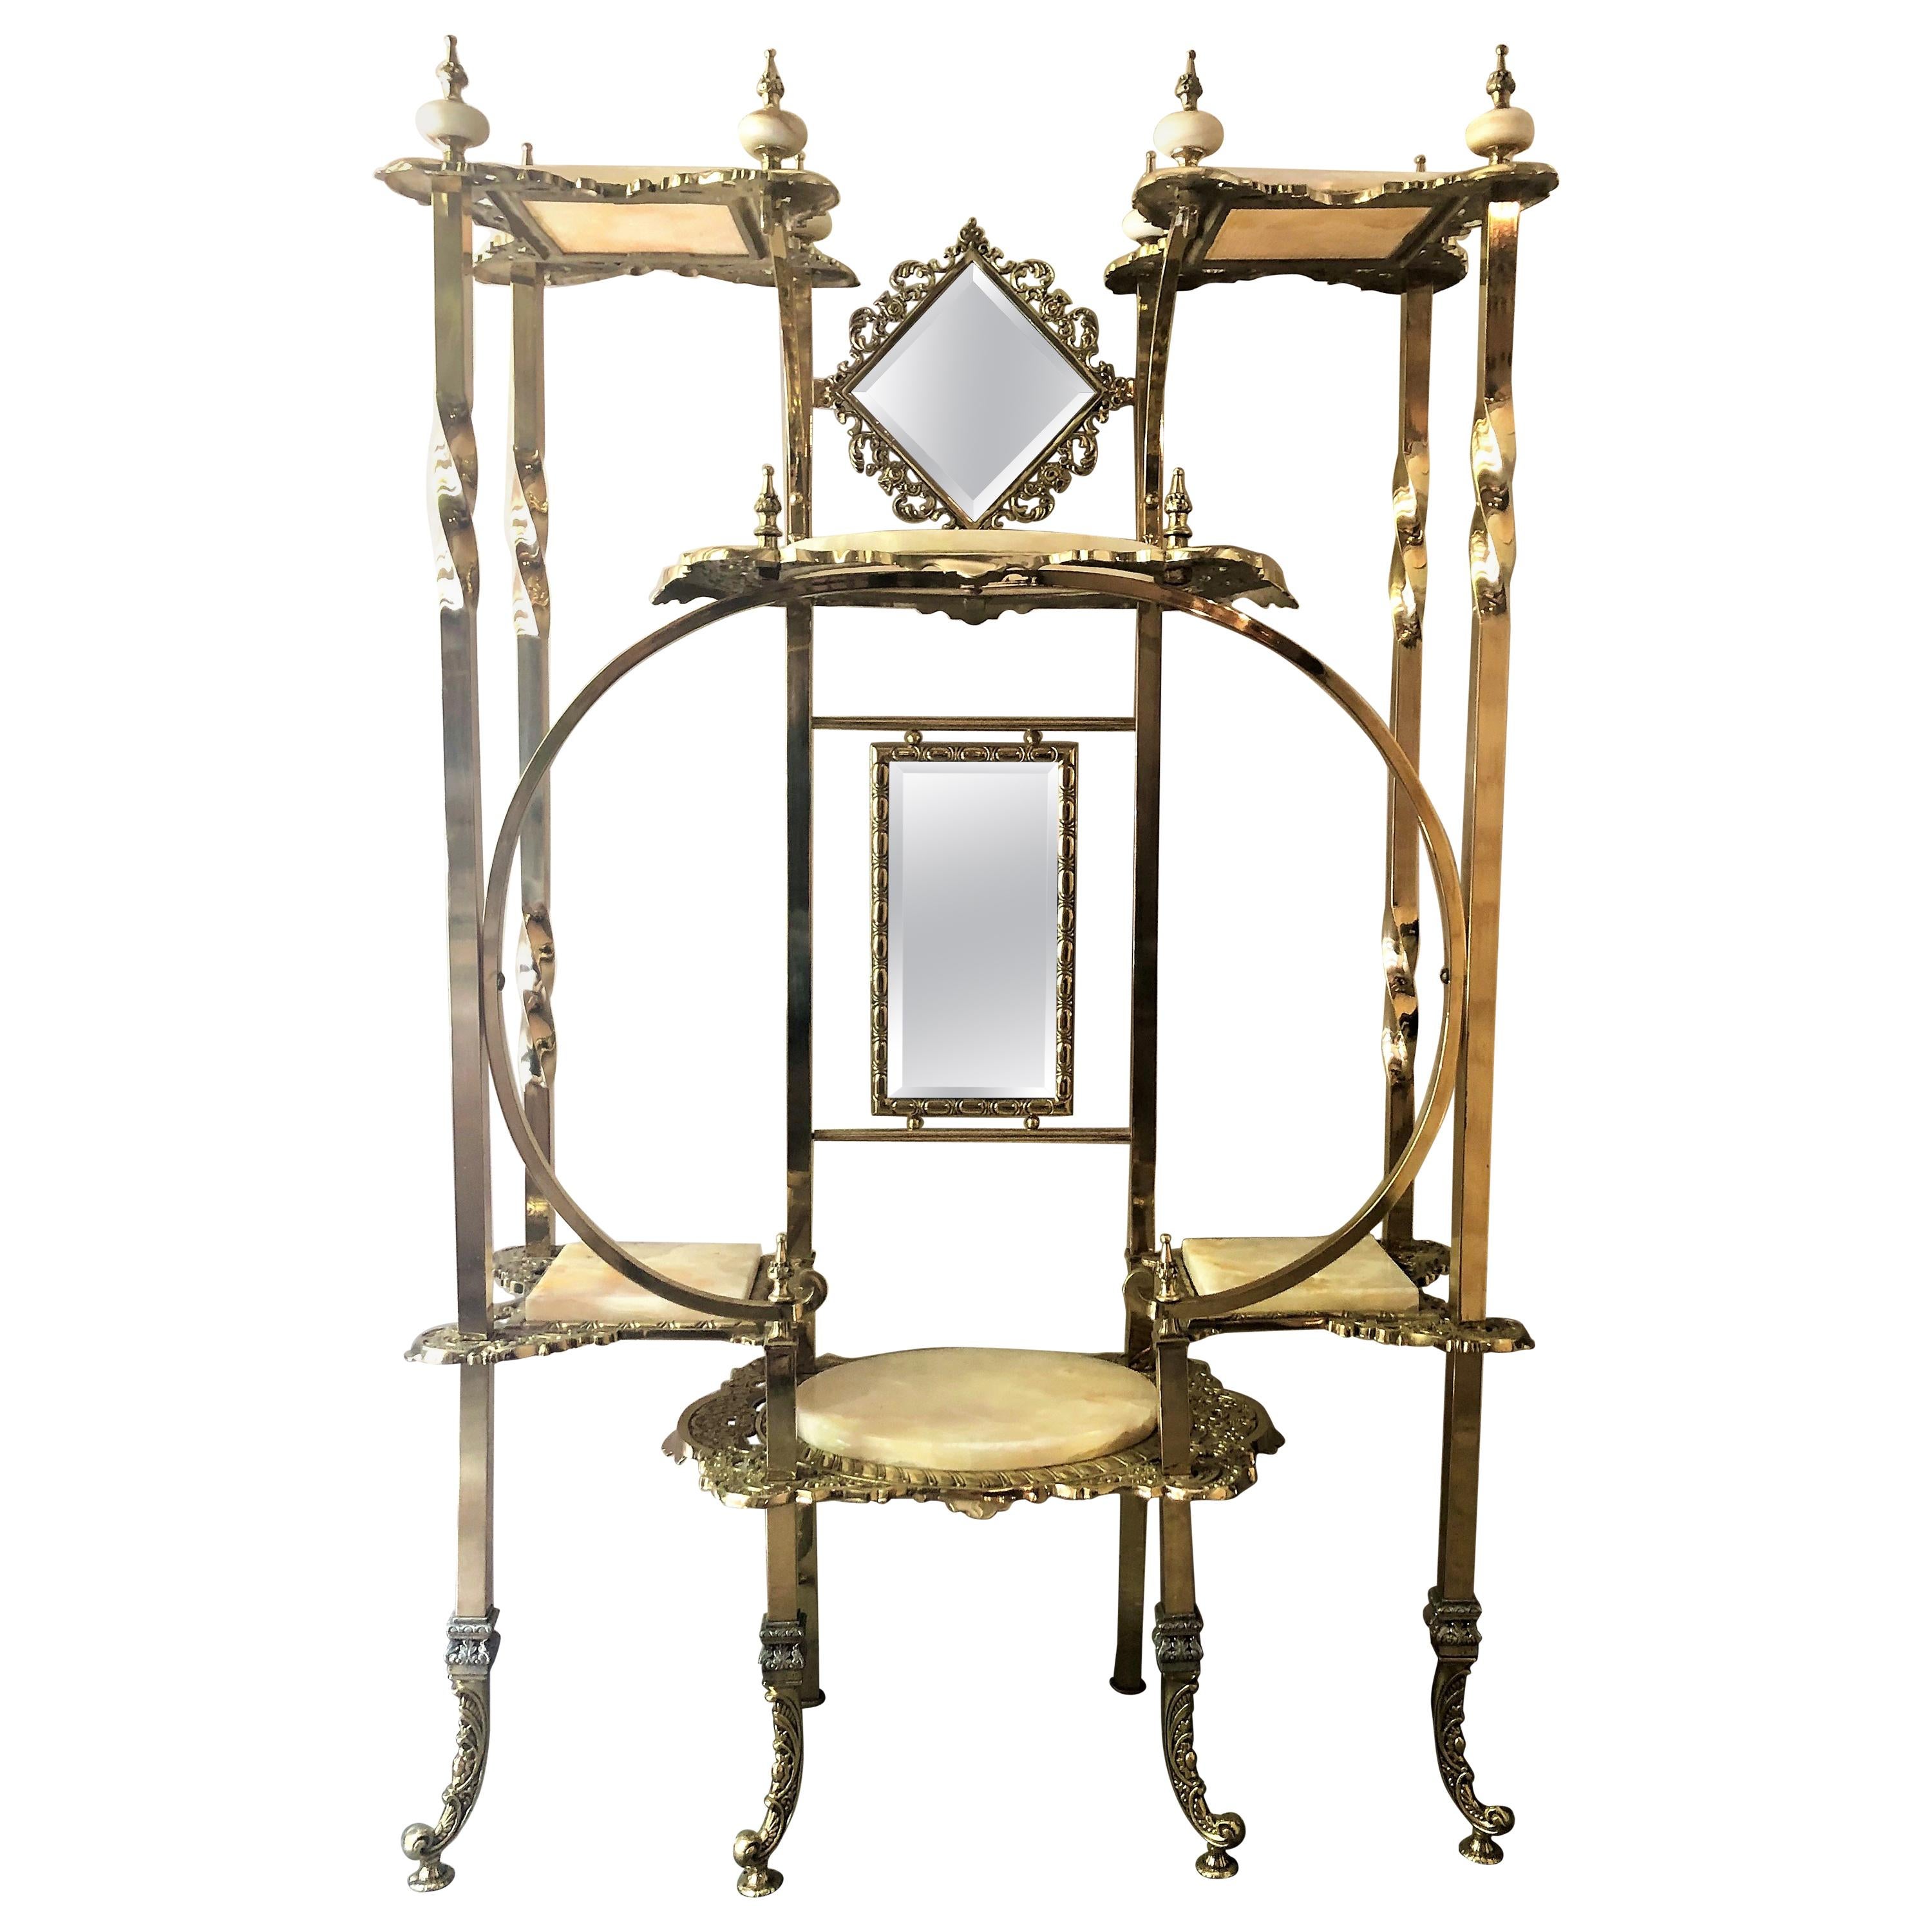 Antique English High Victorian Brass and Onyx Mirrored Etagere, circa 1890-1910